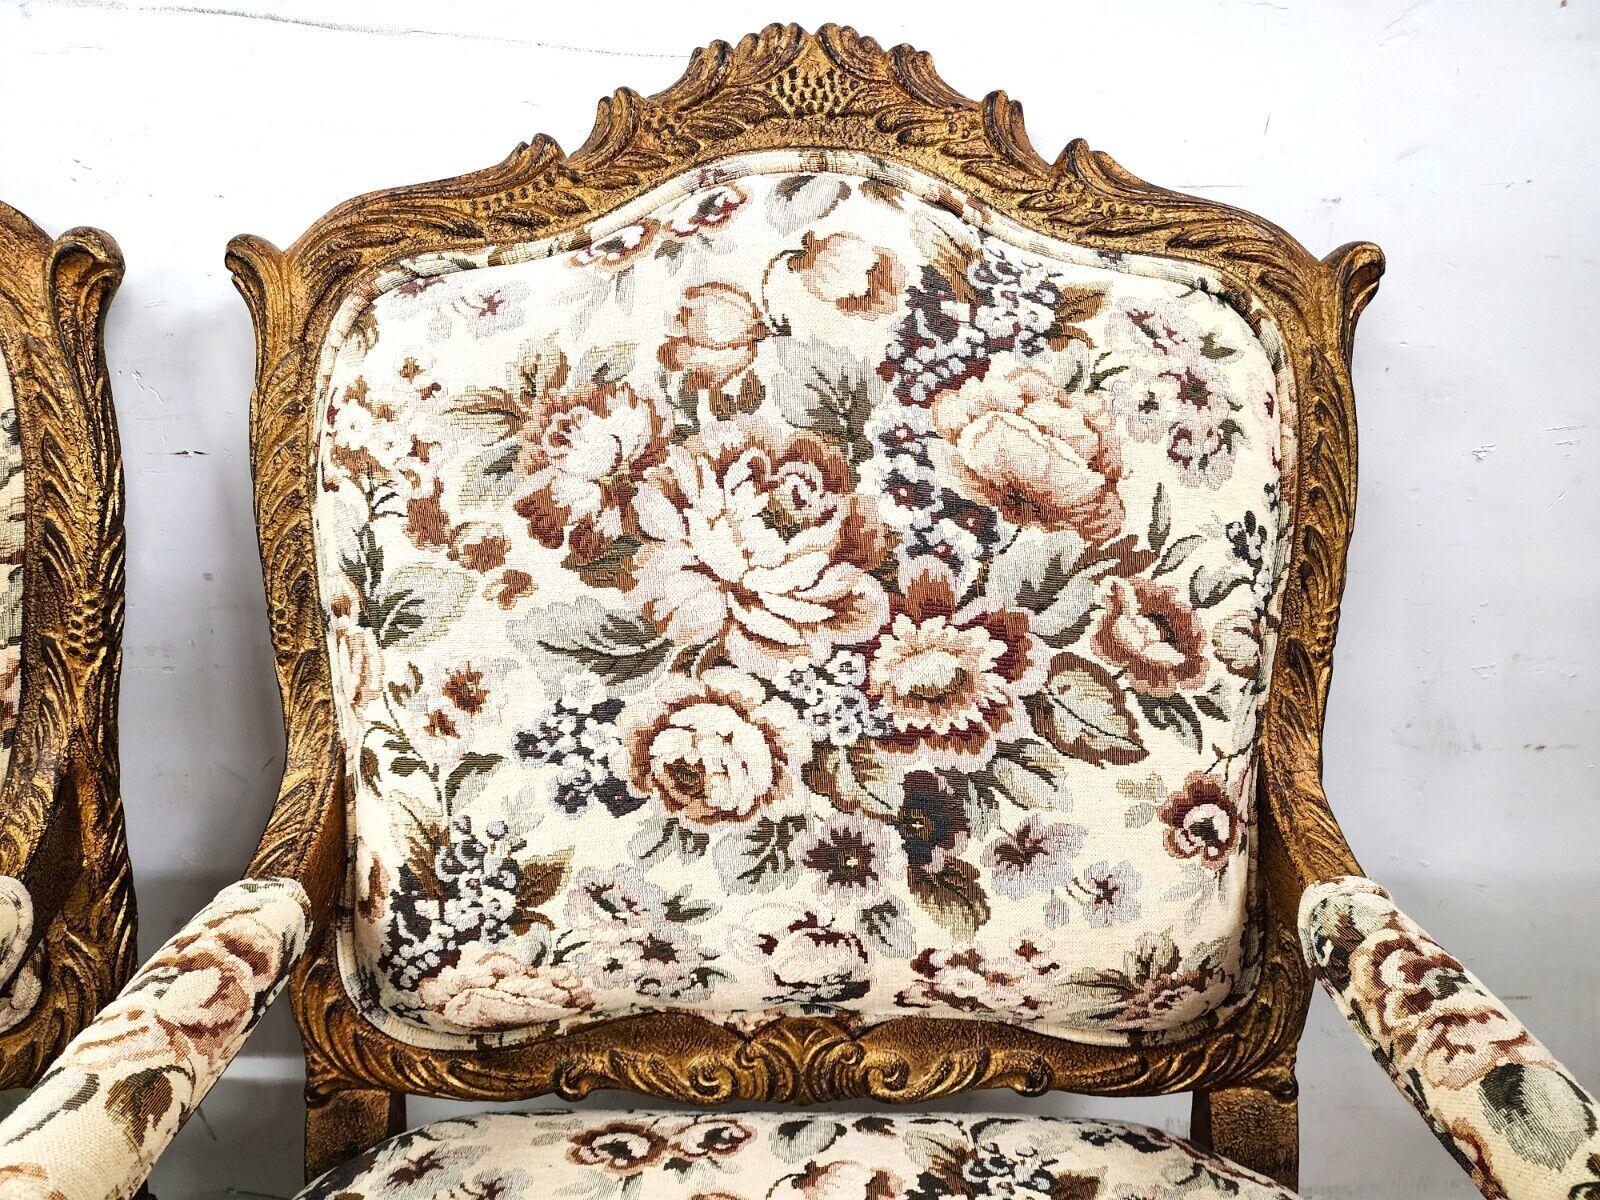 20th Century French Louis XV Rococo Giltwood Fauteuil Oversized Armchairs - a Pair For Sale